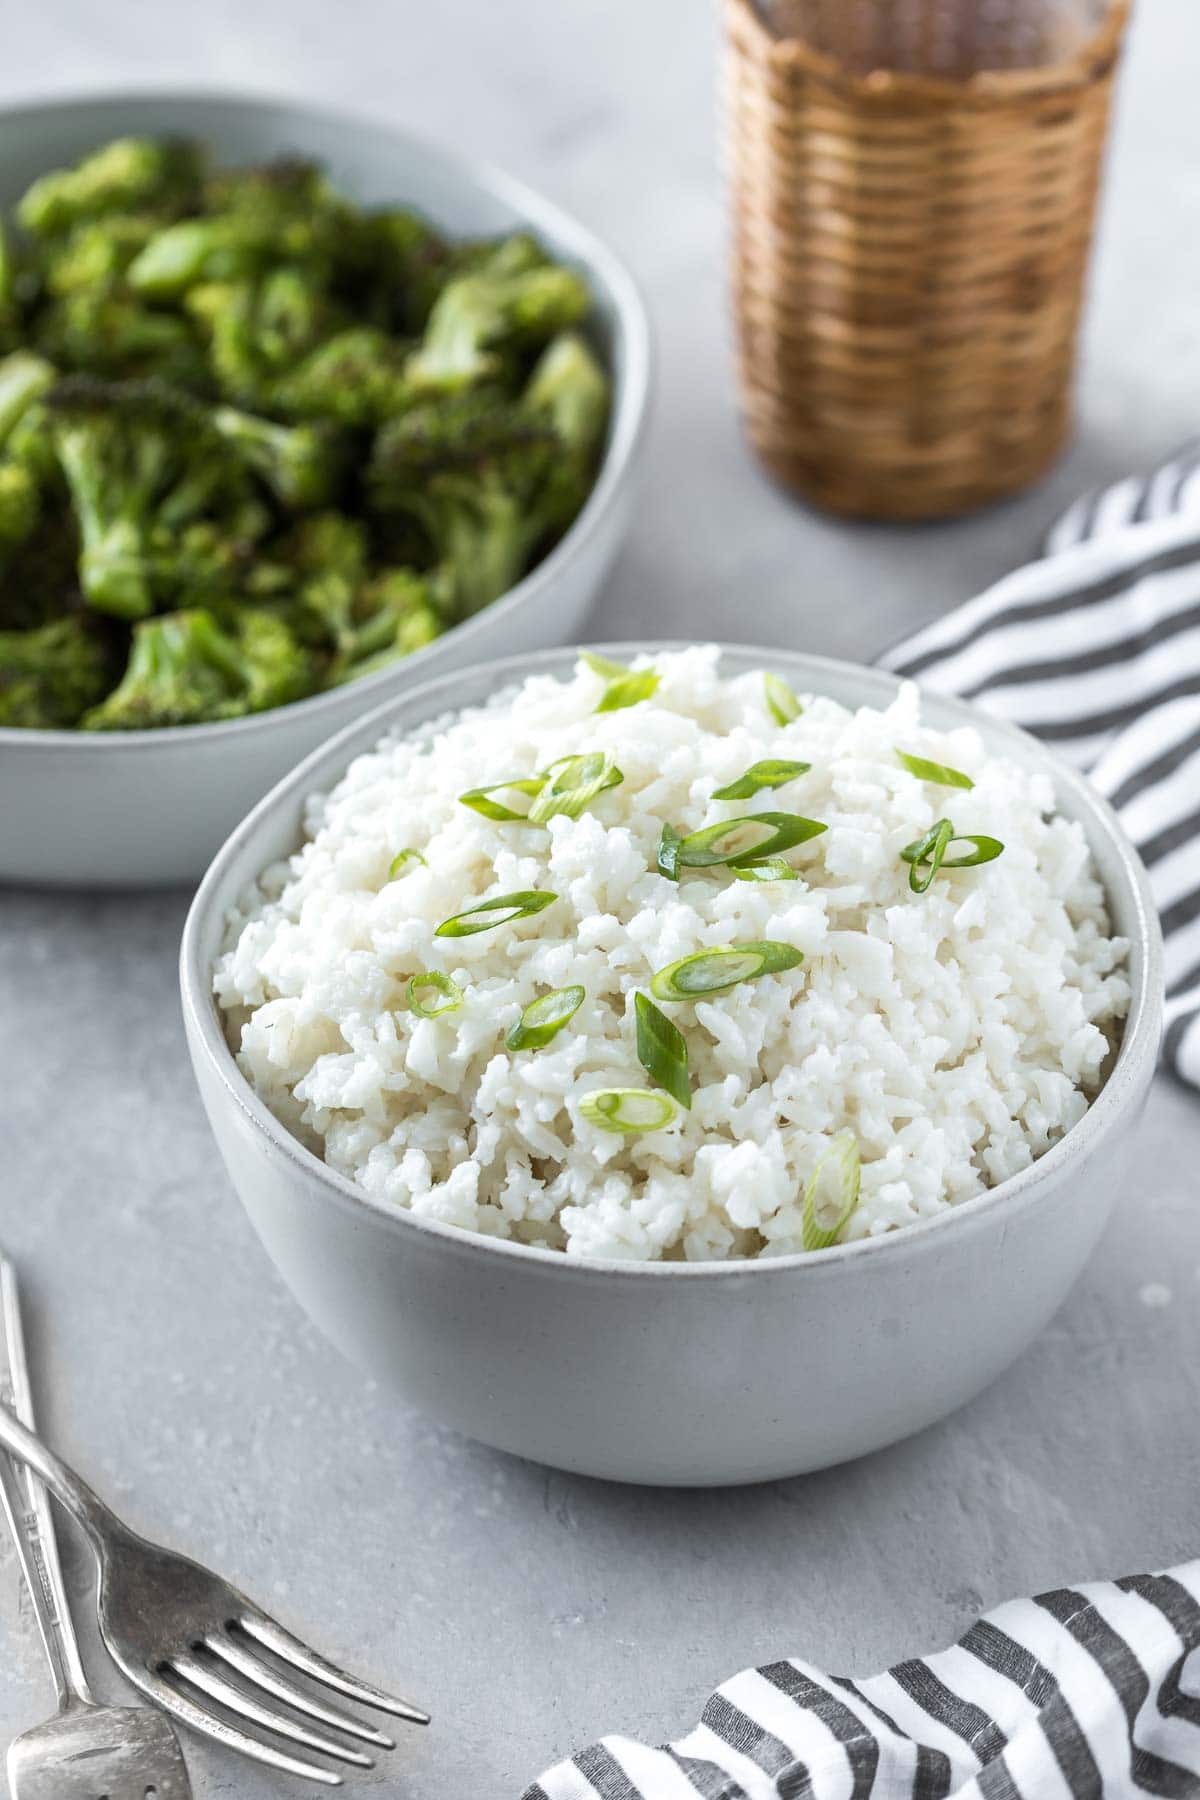 coconut rice recipe in a serving bowl topped with sliced green onions on a gray surface with forks, a striped napkin and a bowl of broccoli